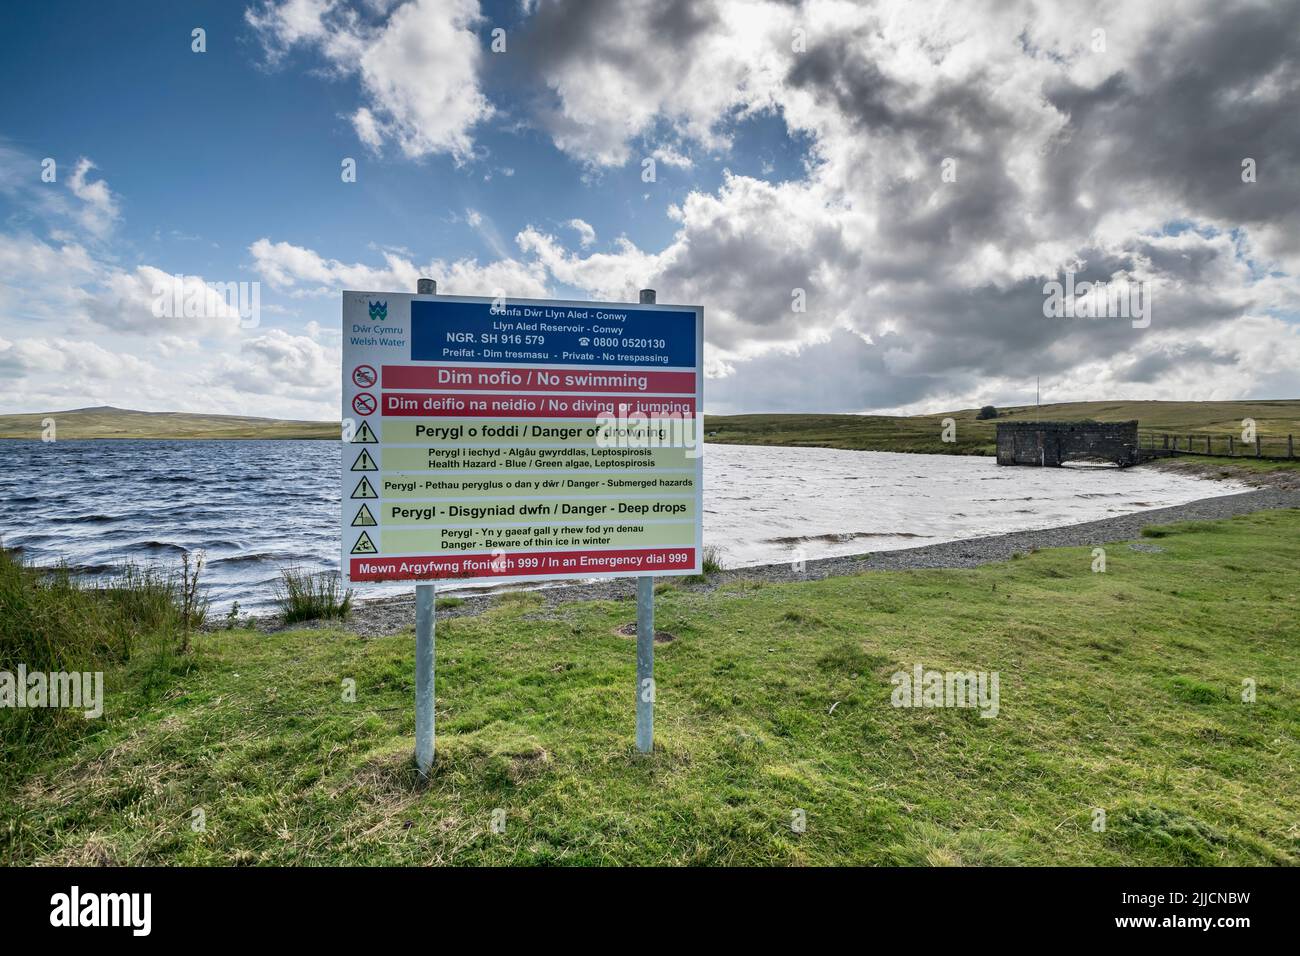 Llyn Aled reservoir on the Denbighshire moors in North Wales Stock Photo